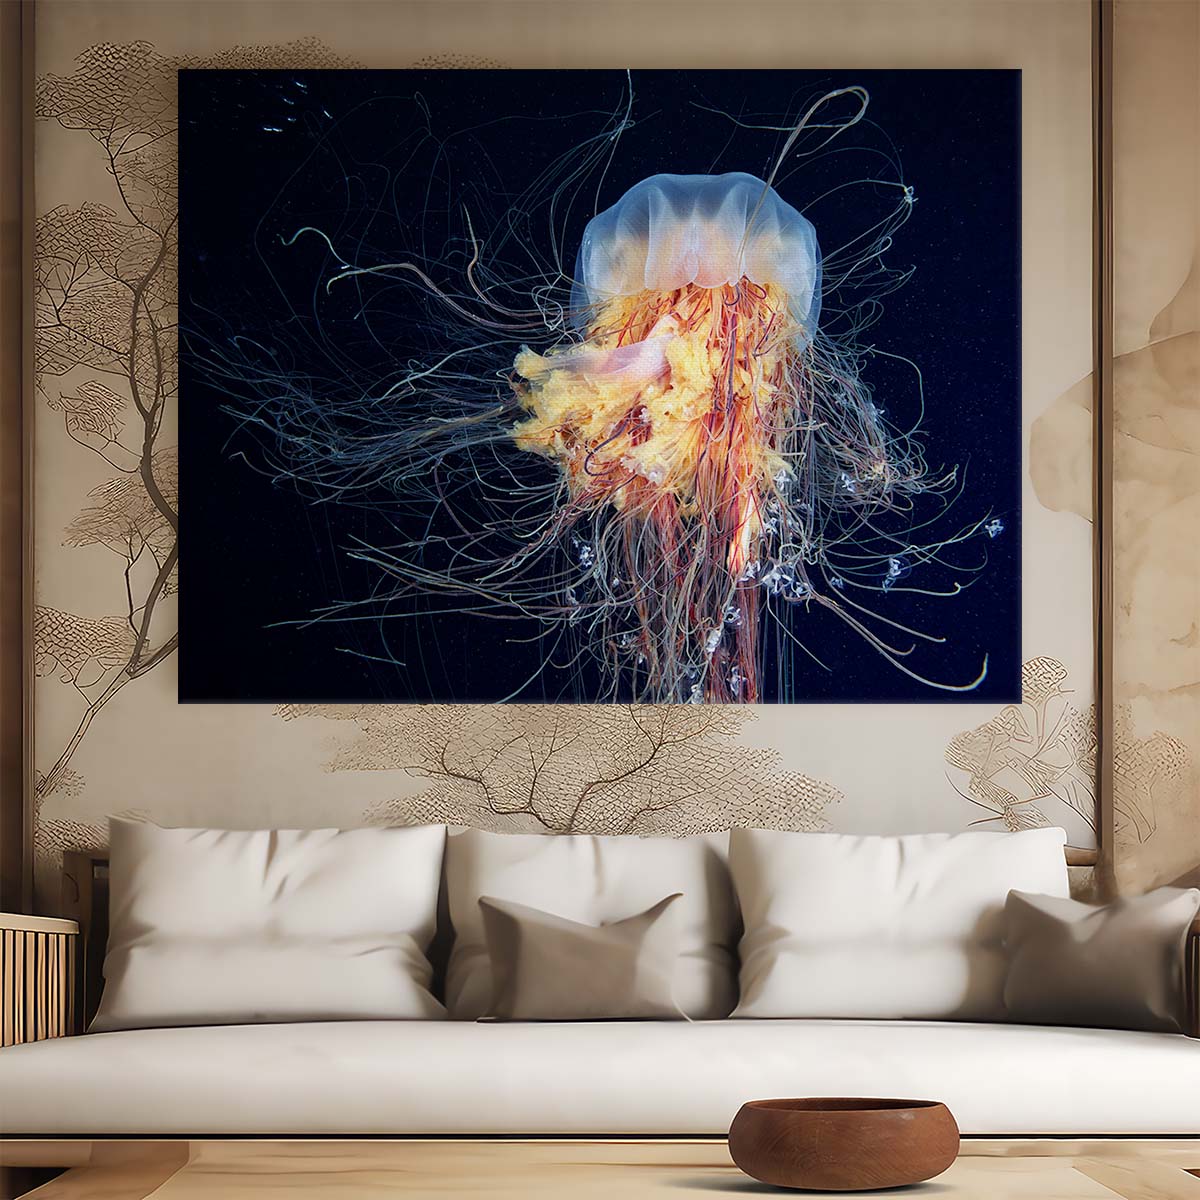 Majestic Lion's Mane Jellyfish Danger Wall Art by Luxuriance Designs. Made in USA.